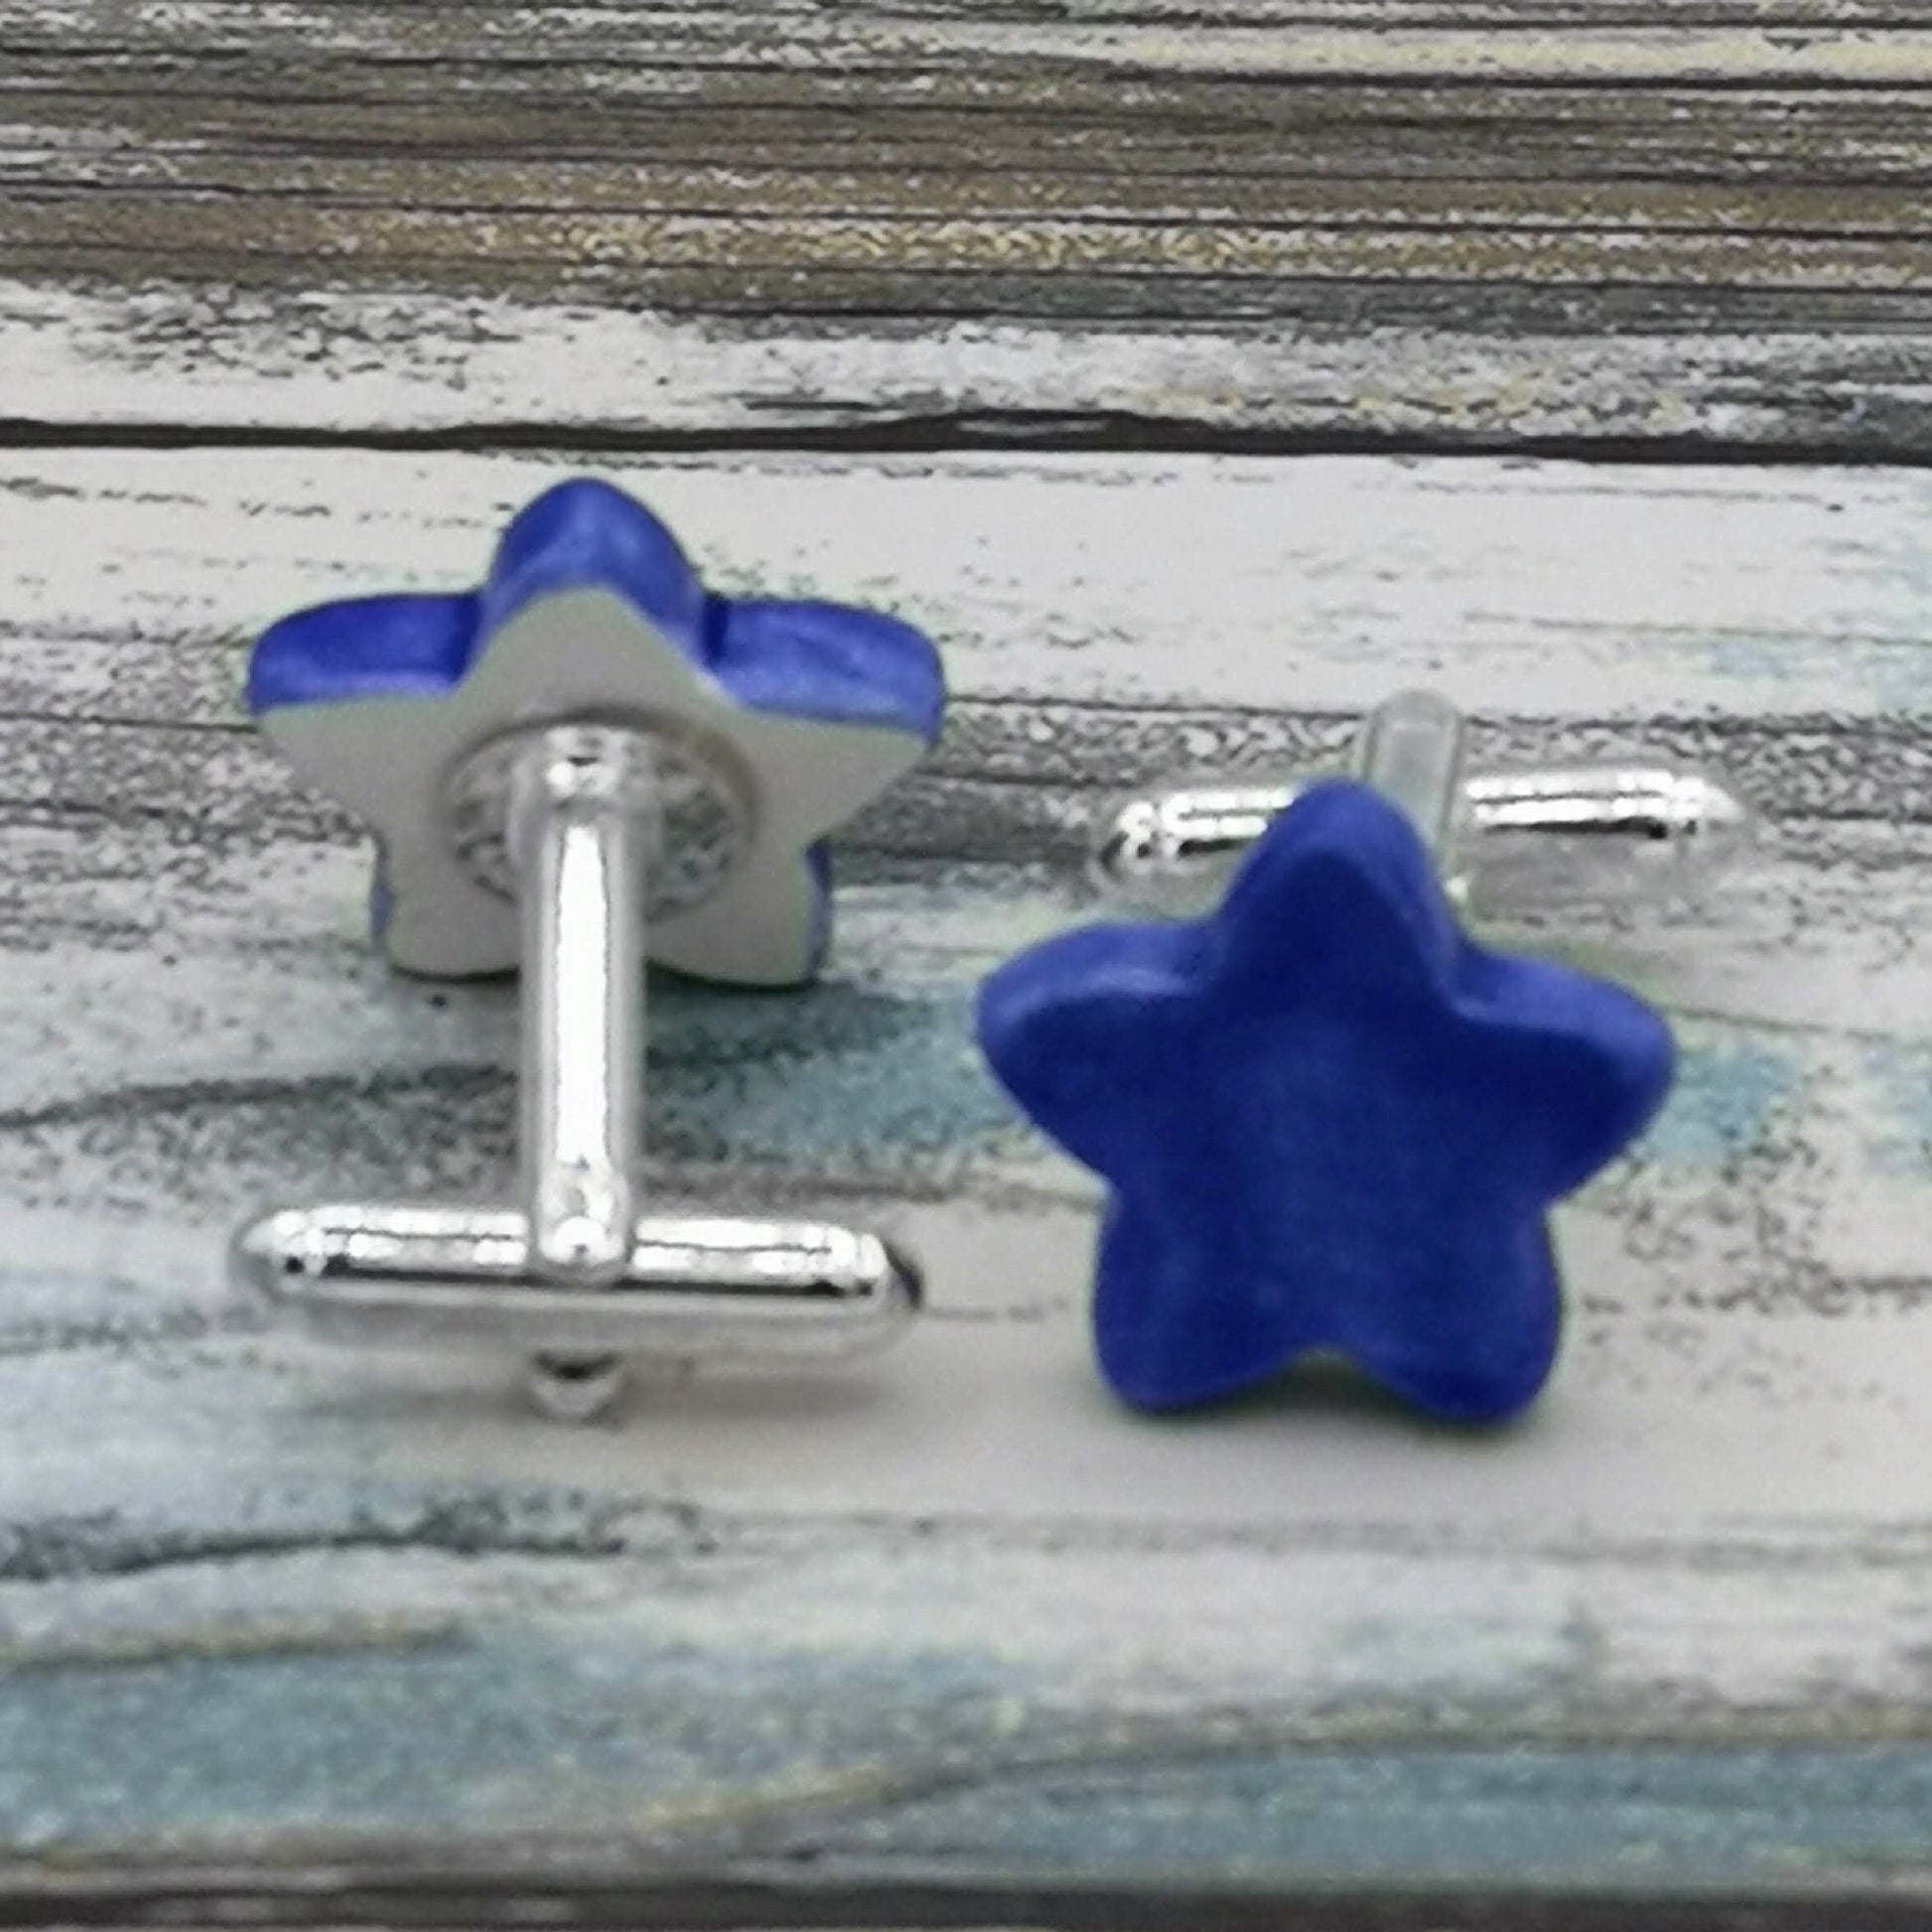 Star Cufflinks For Men, 9th Wedding Anniversary Gift For Husband, Celestial Fathers Day Gift From Daughter, Cute Boyfriend Gift - Ceramica Ana Rafael